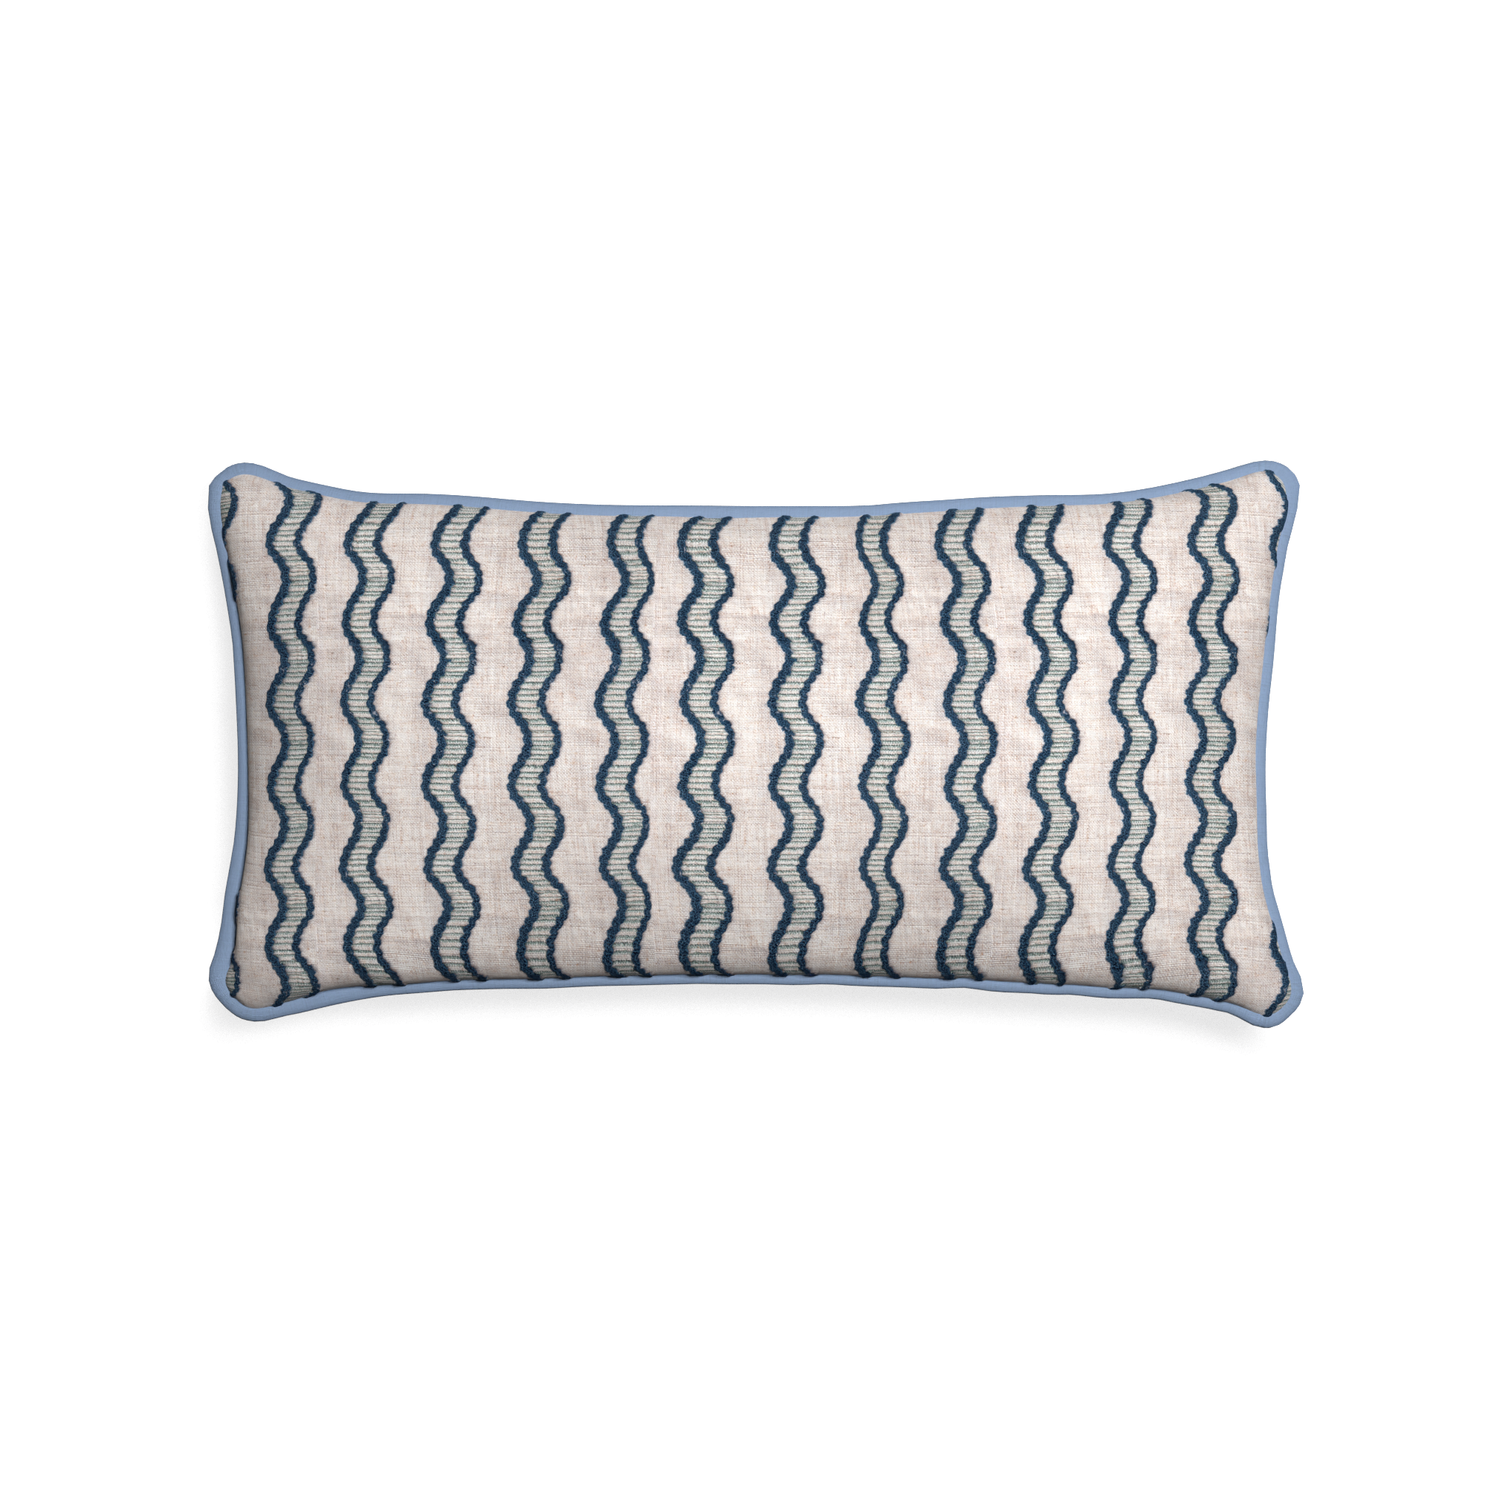 Midi-lumbar beatrice custom embroidered wavepillow with sky piping on white background